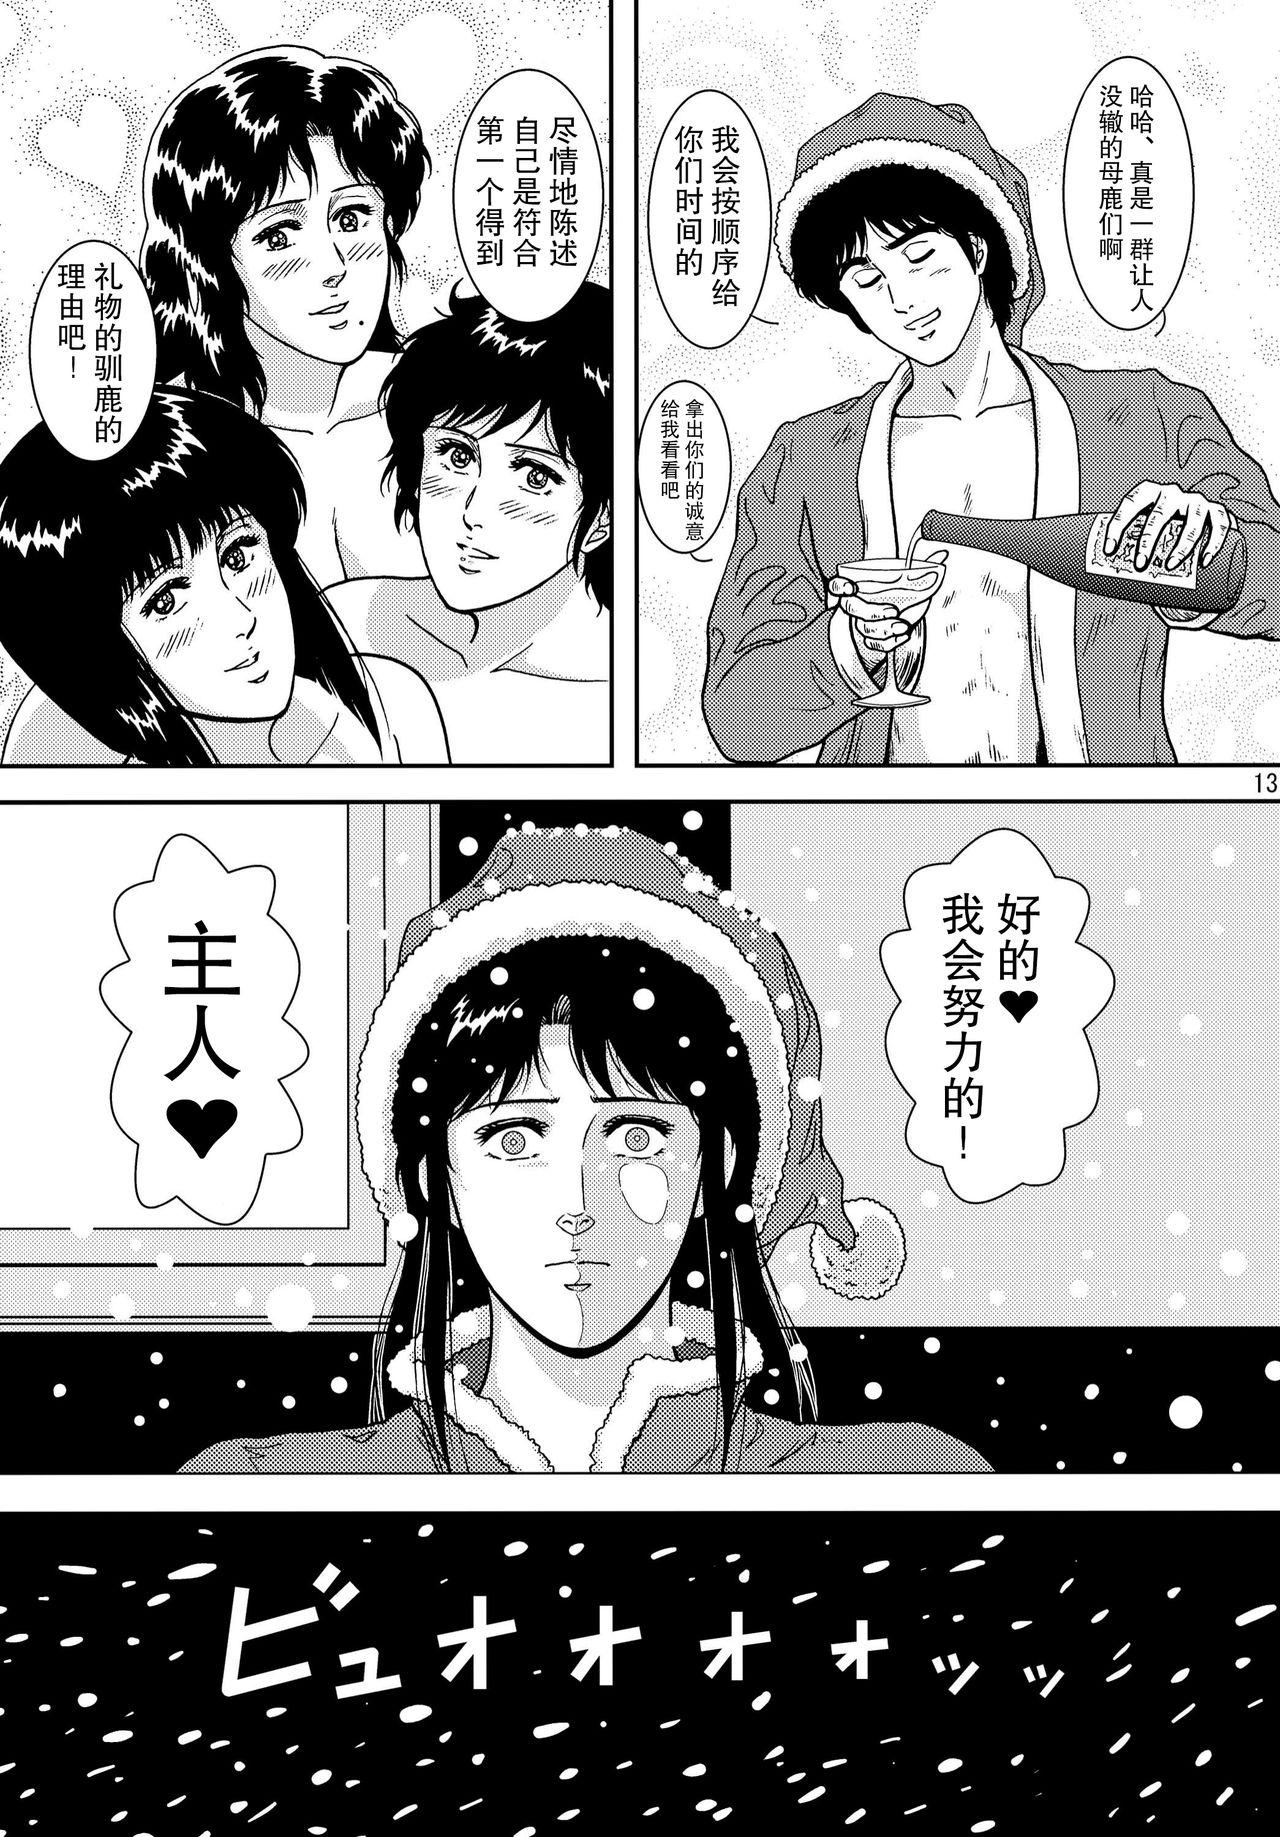 Rabo NIGHTFLY vol.10 PLEASE COME HOME for X'mas - Cats eye Straight - Page 13